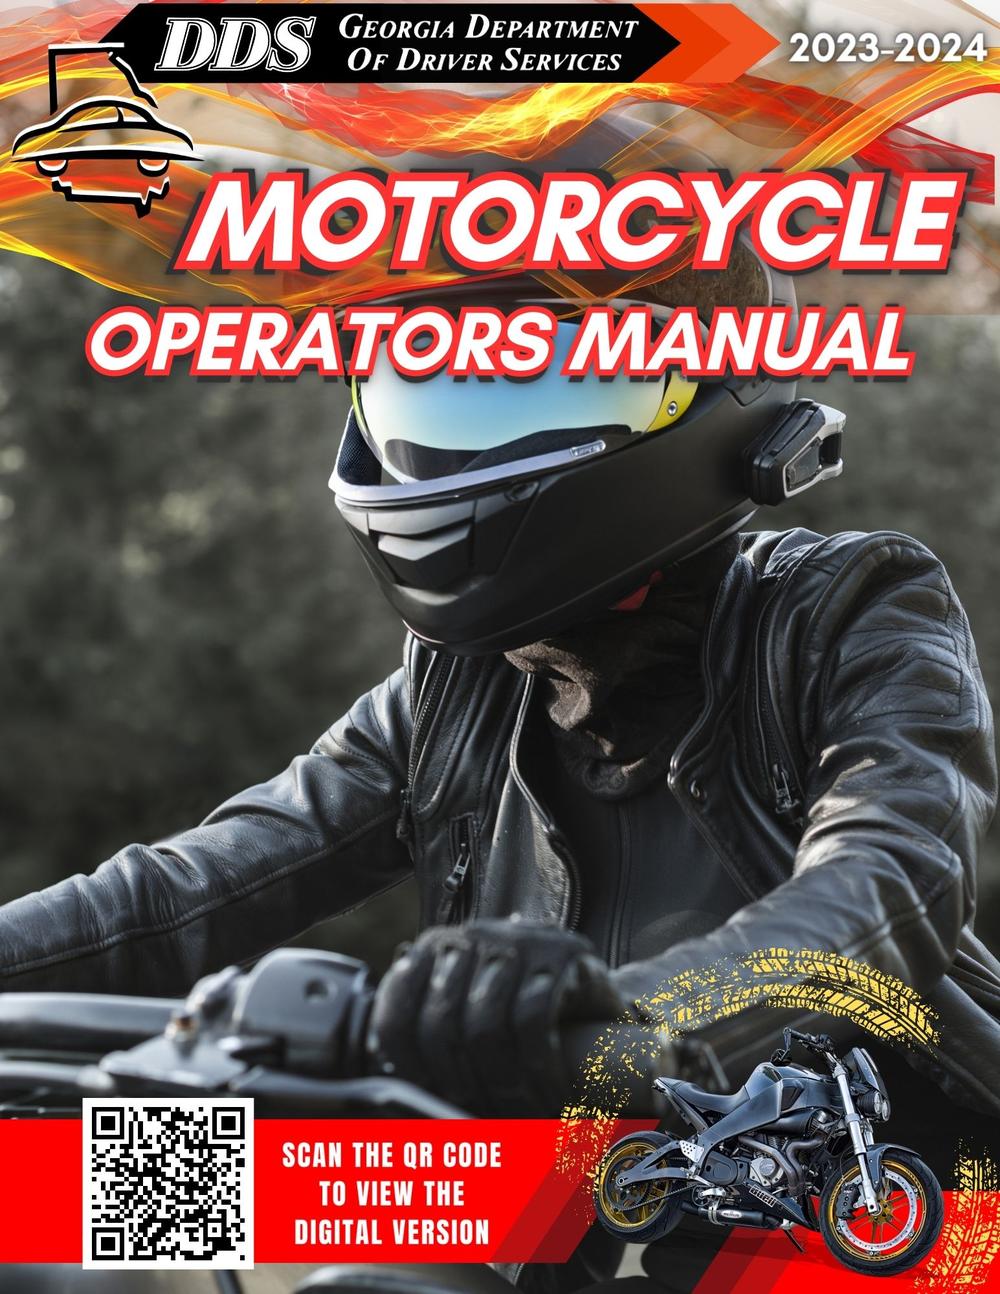 DDS Georgia Department of Driver Services Motorcycle Operators Manual, 2023 to 2024.